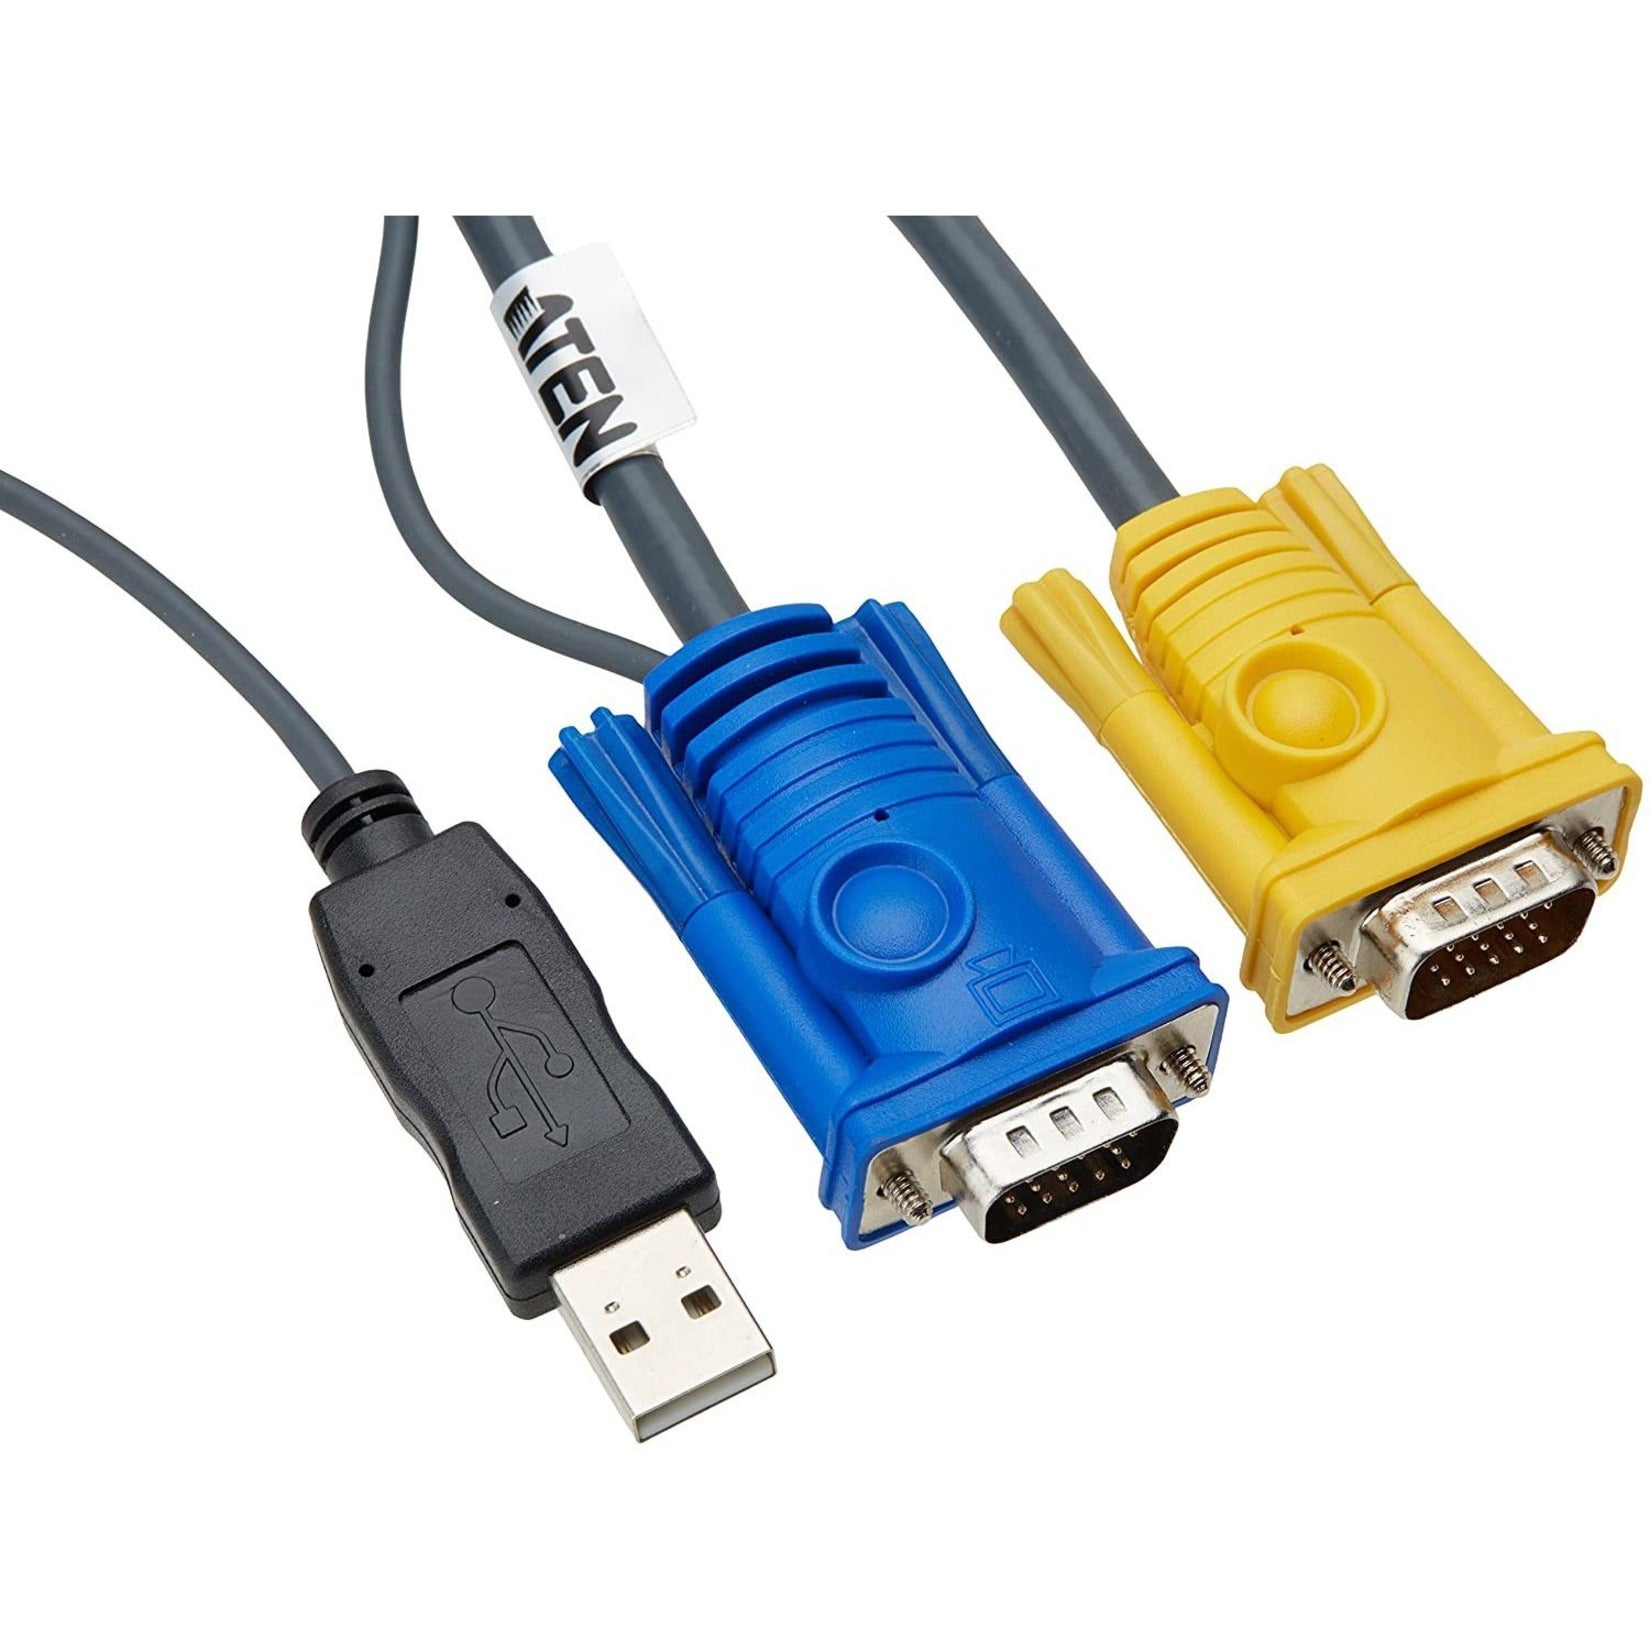 ATEN 2L5202UP PS/2 to USB Intelligent KVM Cable, 6ft